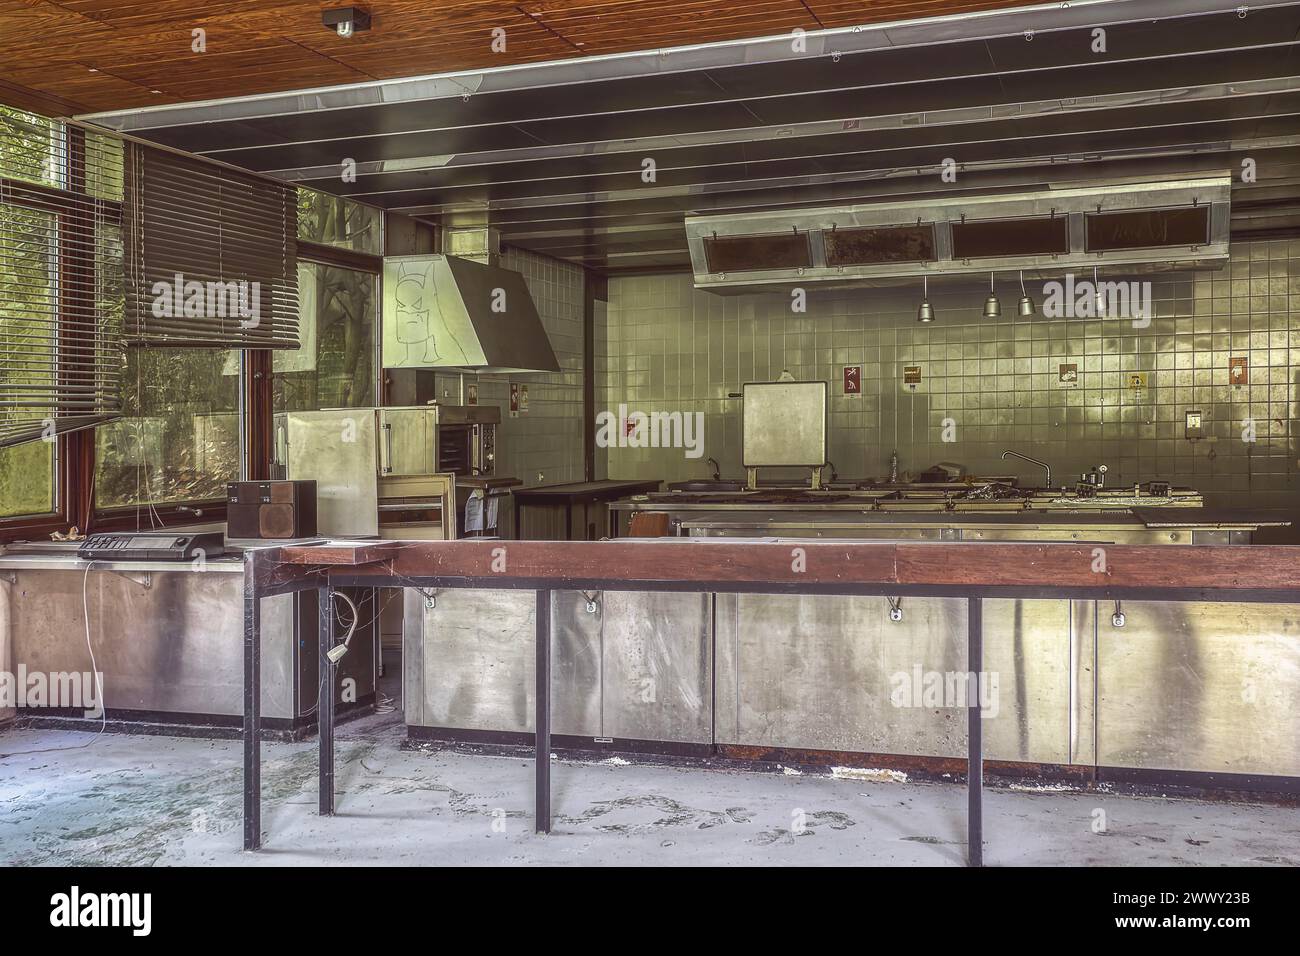 An abandoned, dust-covered industrial kitchen with stainless steel surfaces and tiled backsplash, Institute of Molecular Biology, Lost Place Stock Photo